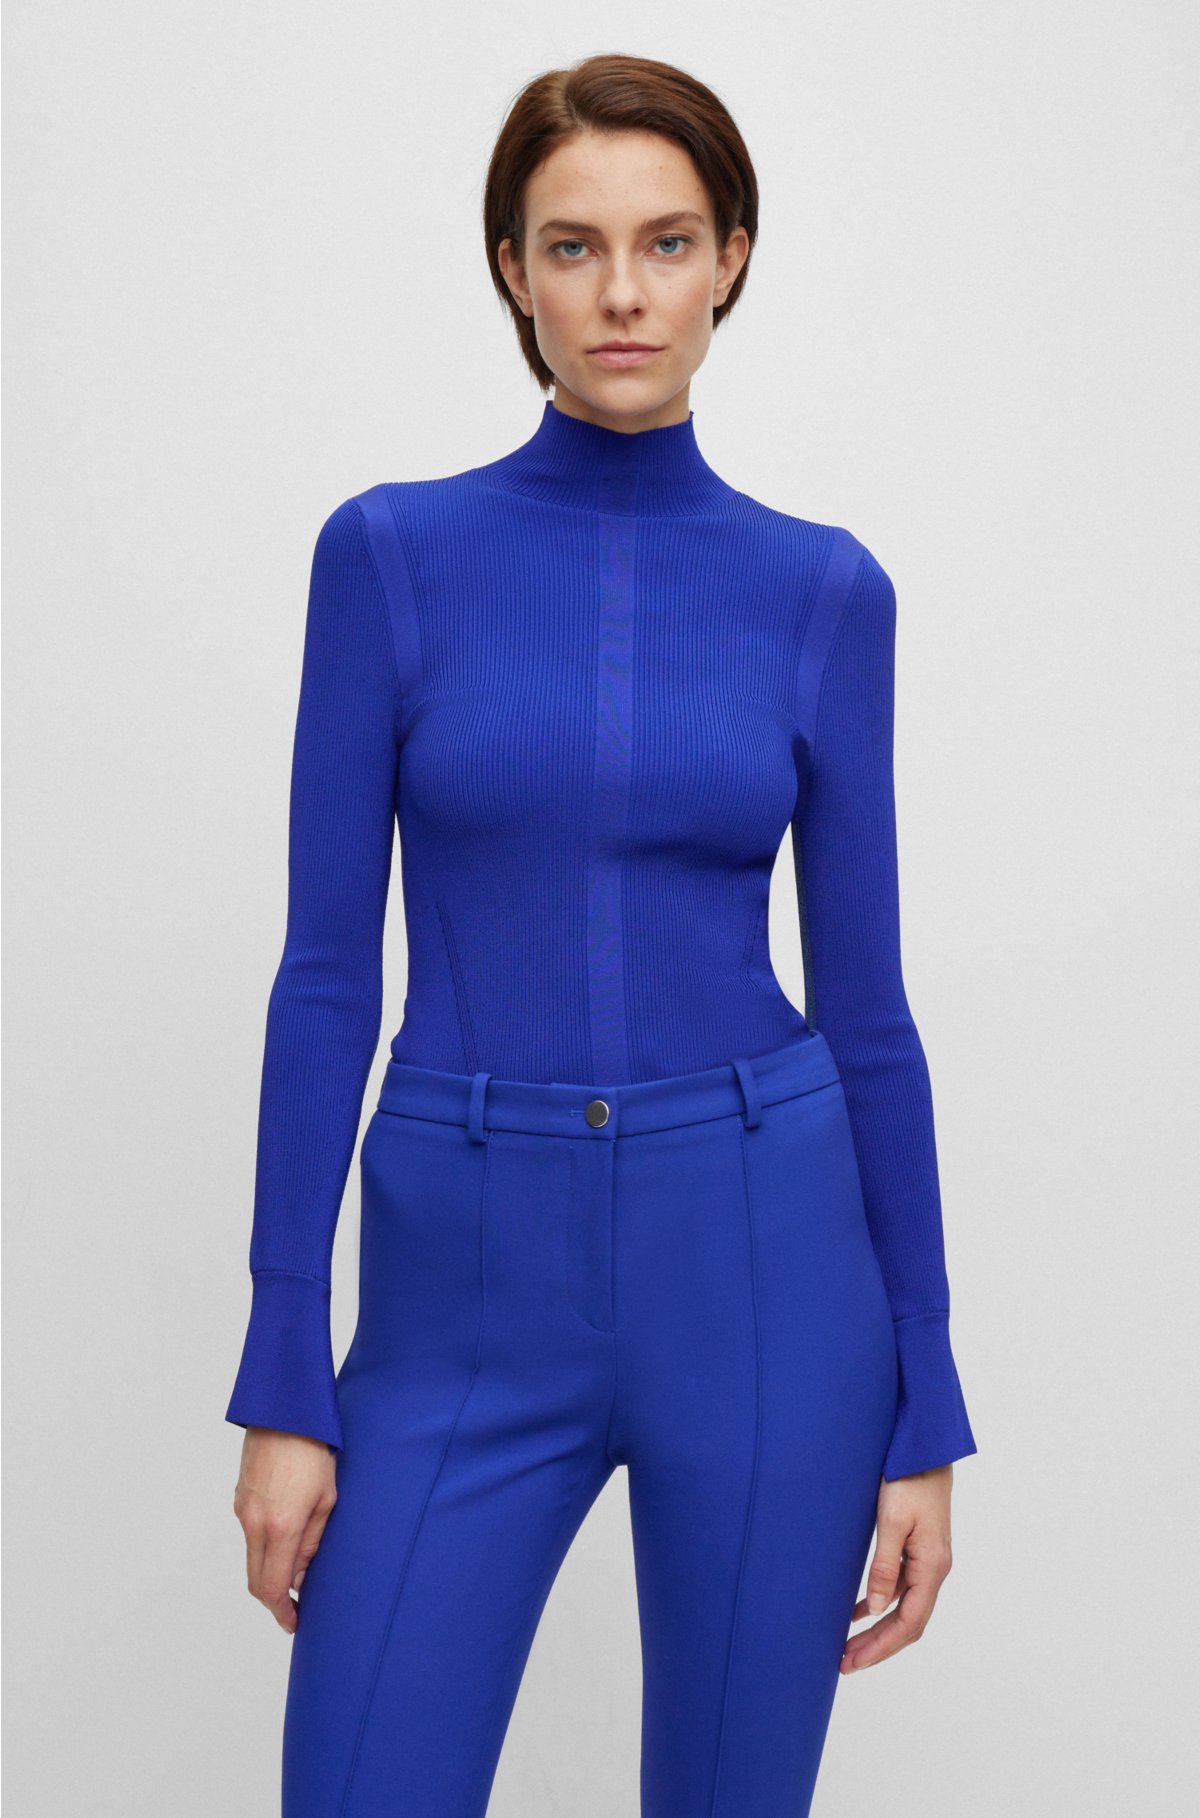 BOSS - High-neck sweater in a ribbed knit